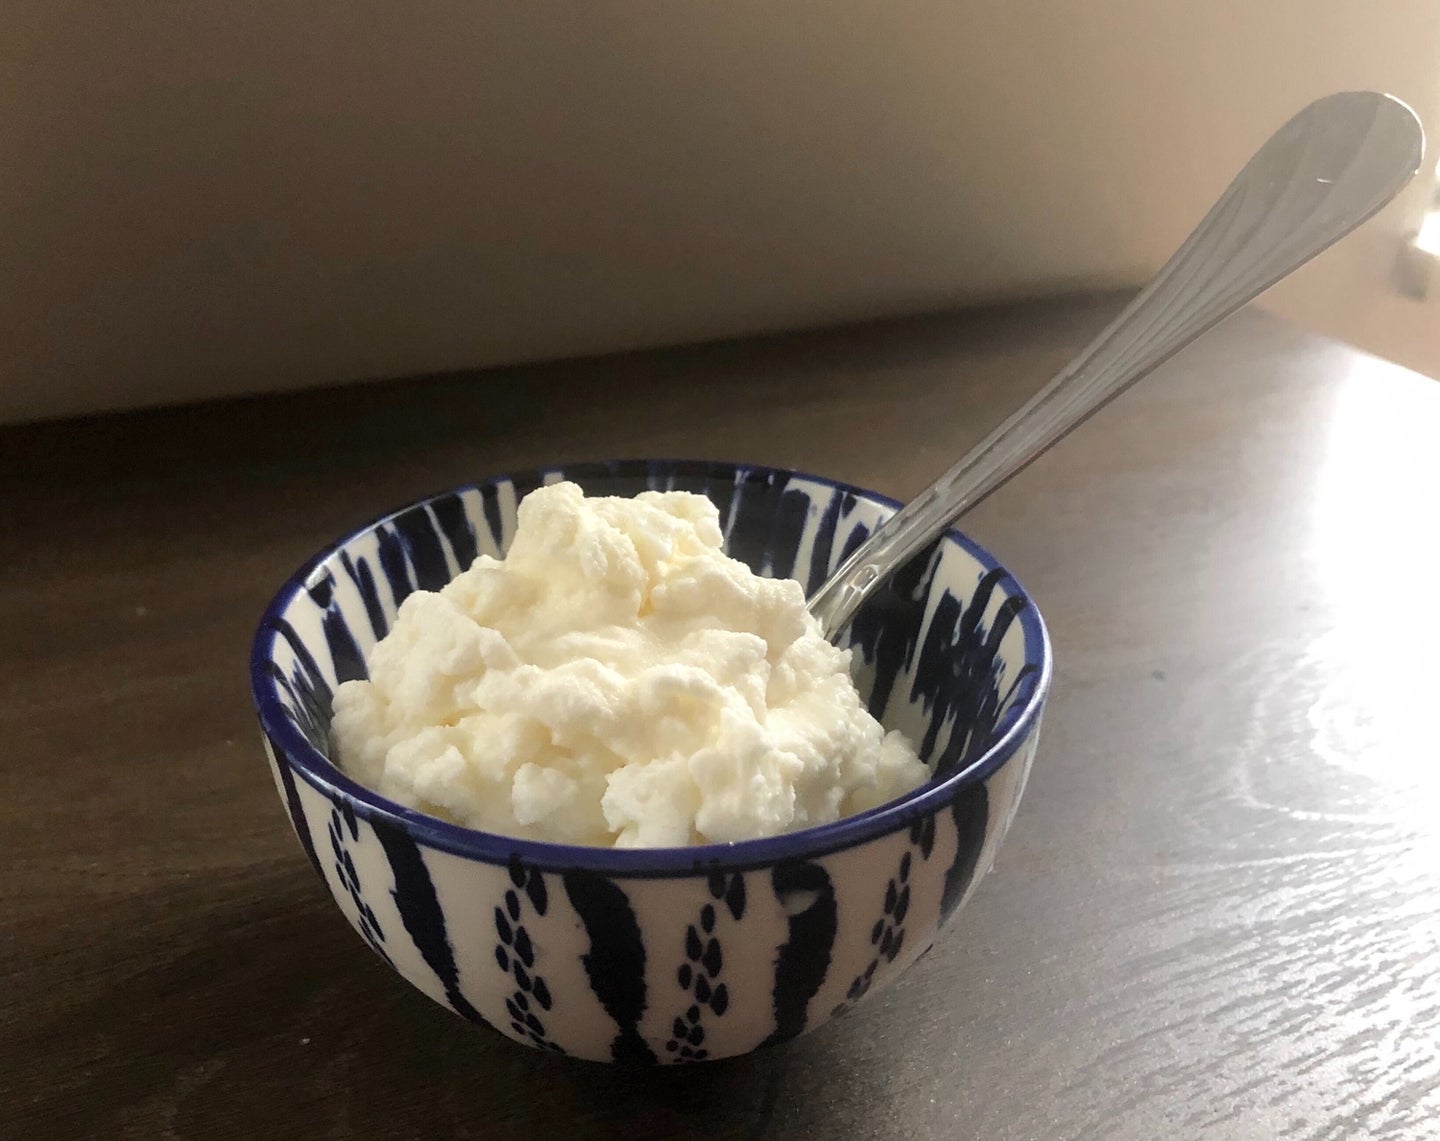 a bowl of vanilla ice cream made by shaking ingredients in a bag full of ice and salt